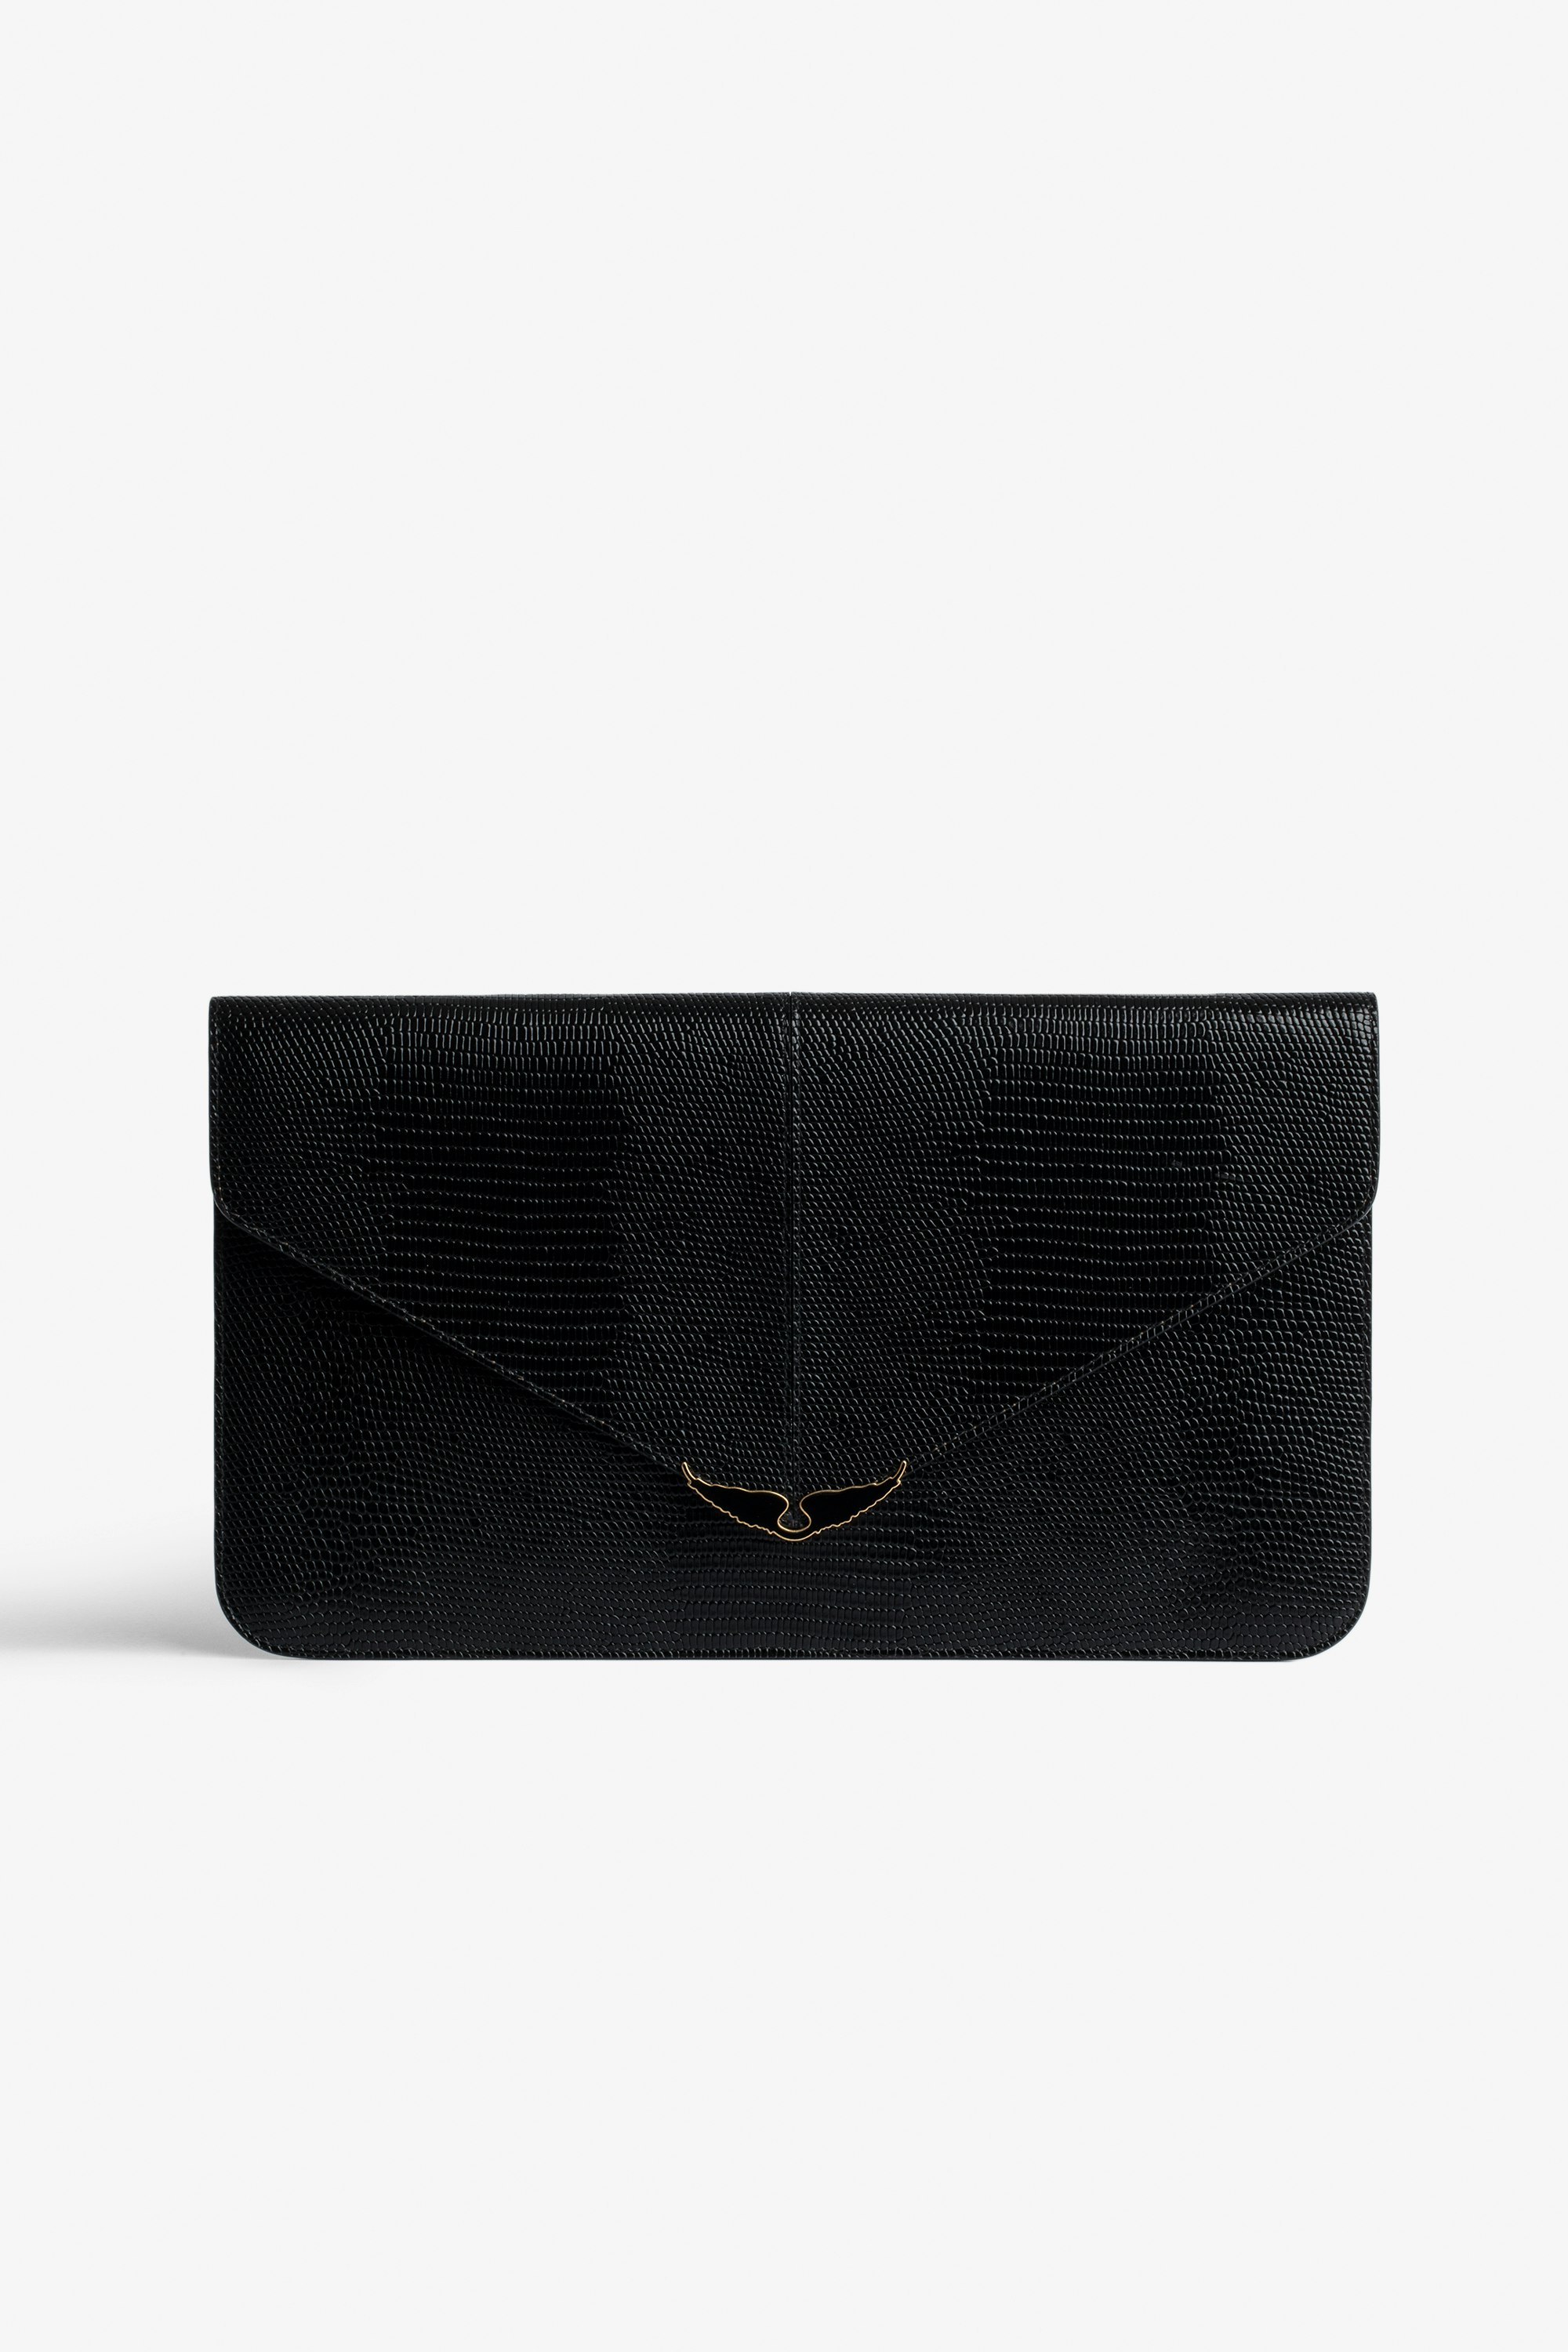 Borderline Clutch Women’s envelope clutch in shiny black leather with embossed iguana, khaki suede interior, and black lacquered wings on the clasp